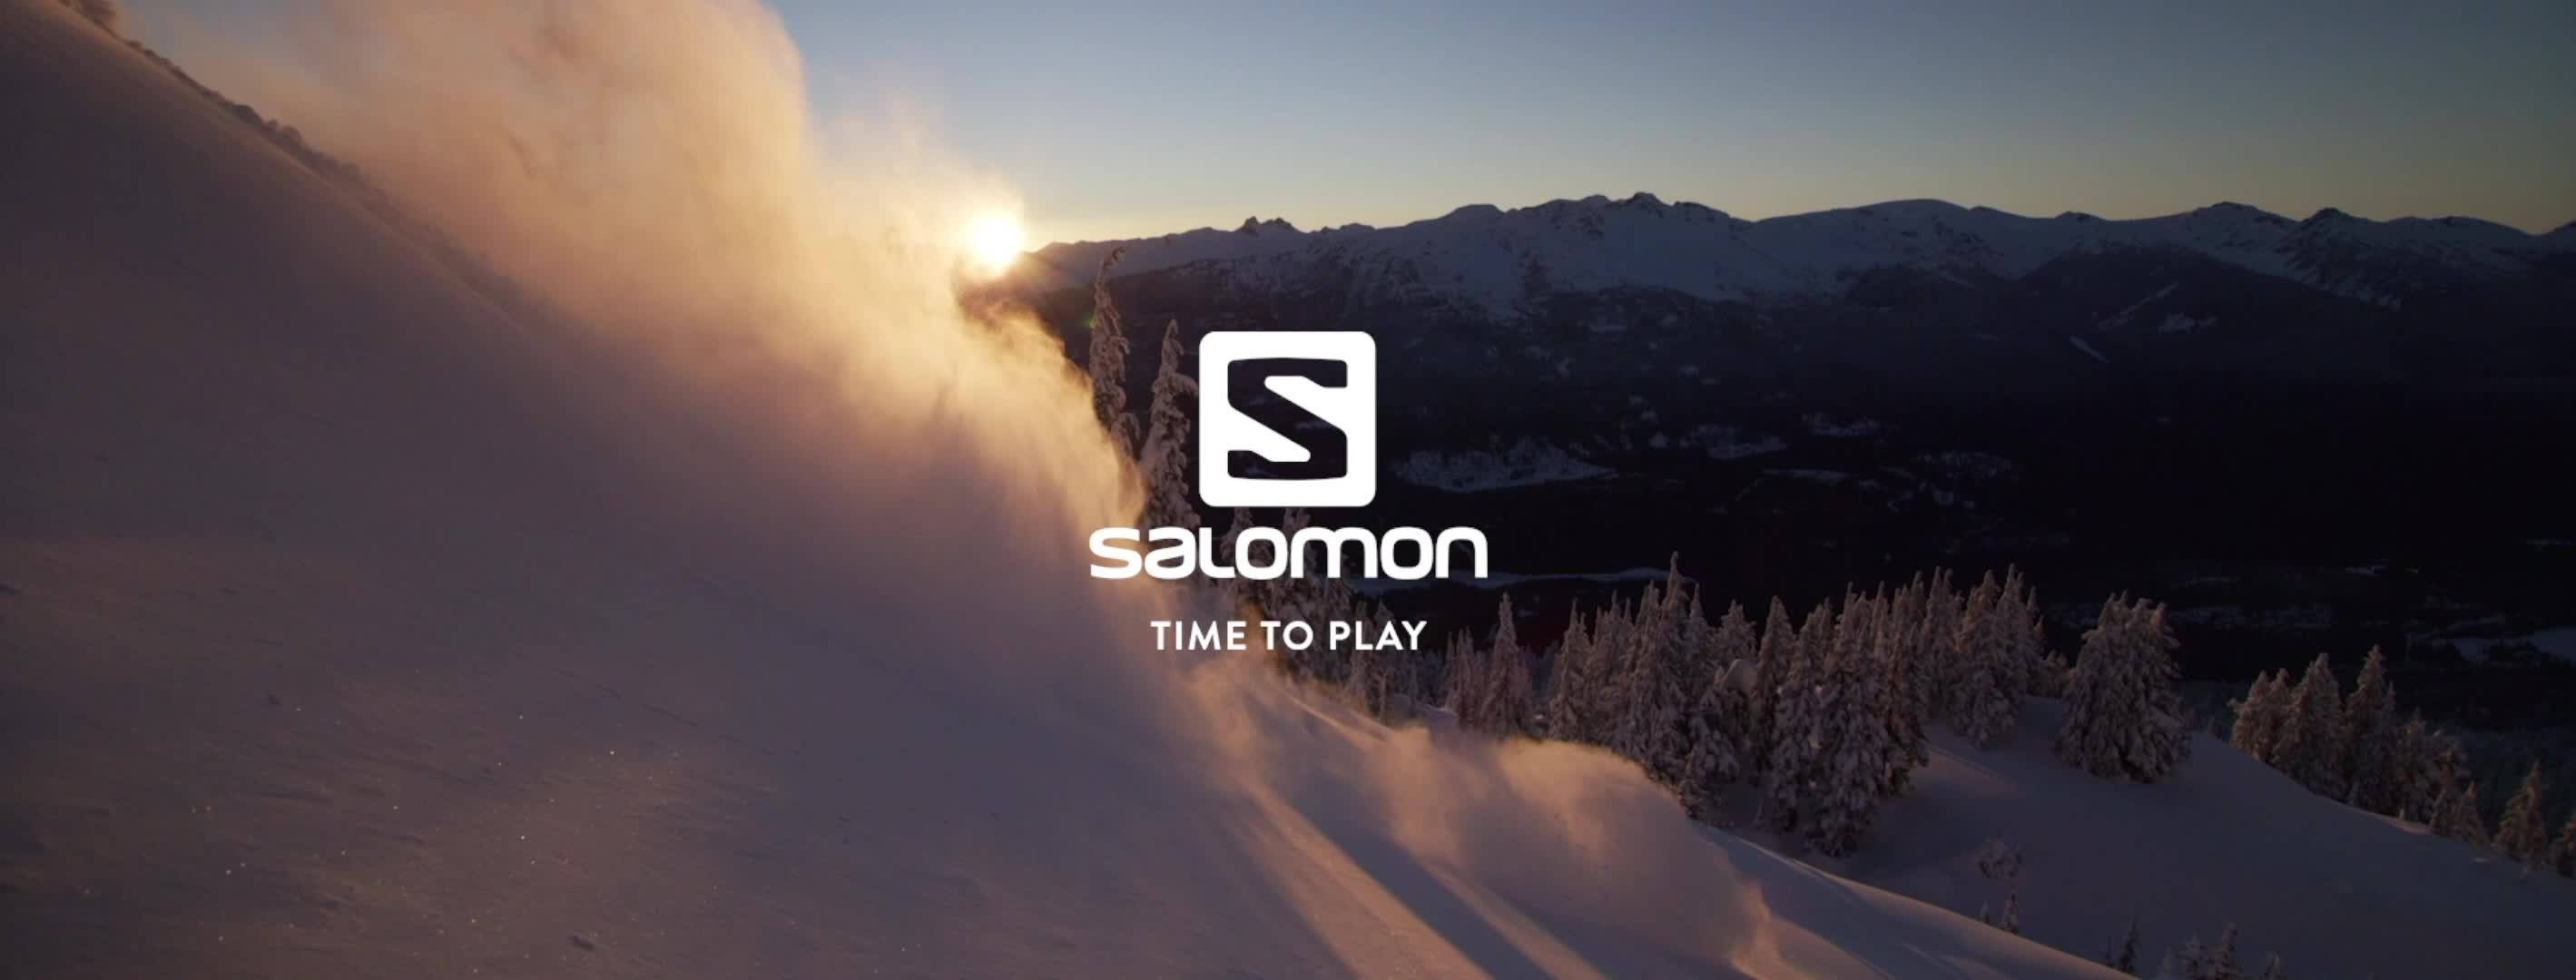 Get 10% OFF your next order when you sign up @ Salomon